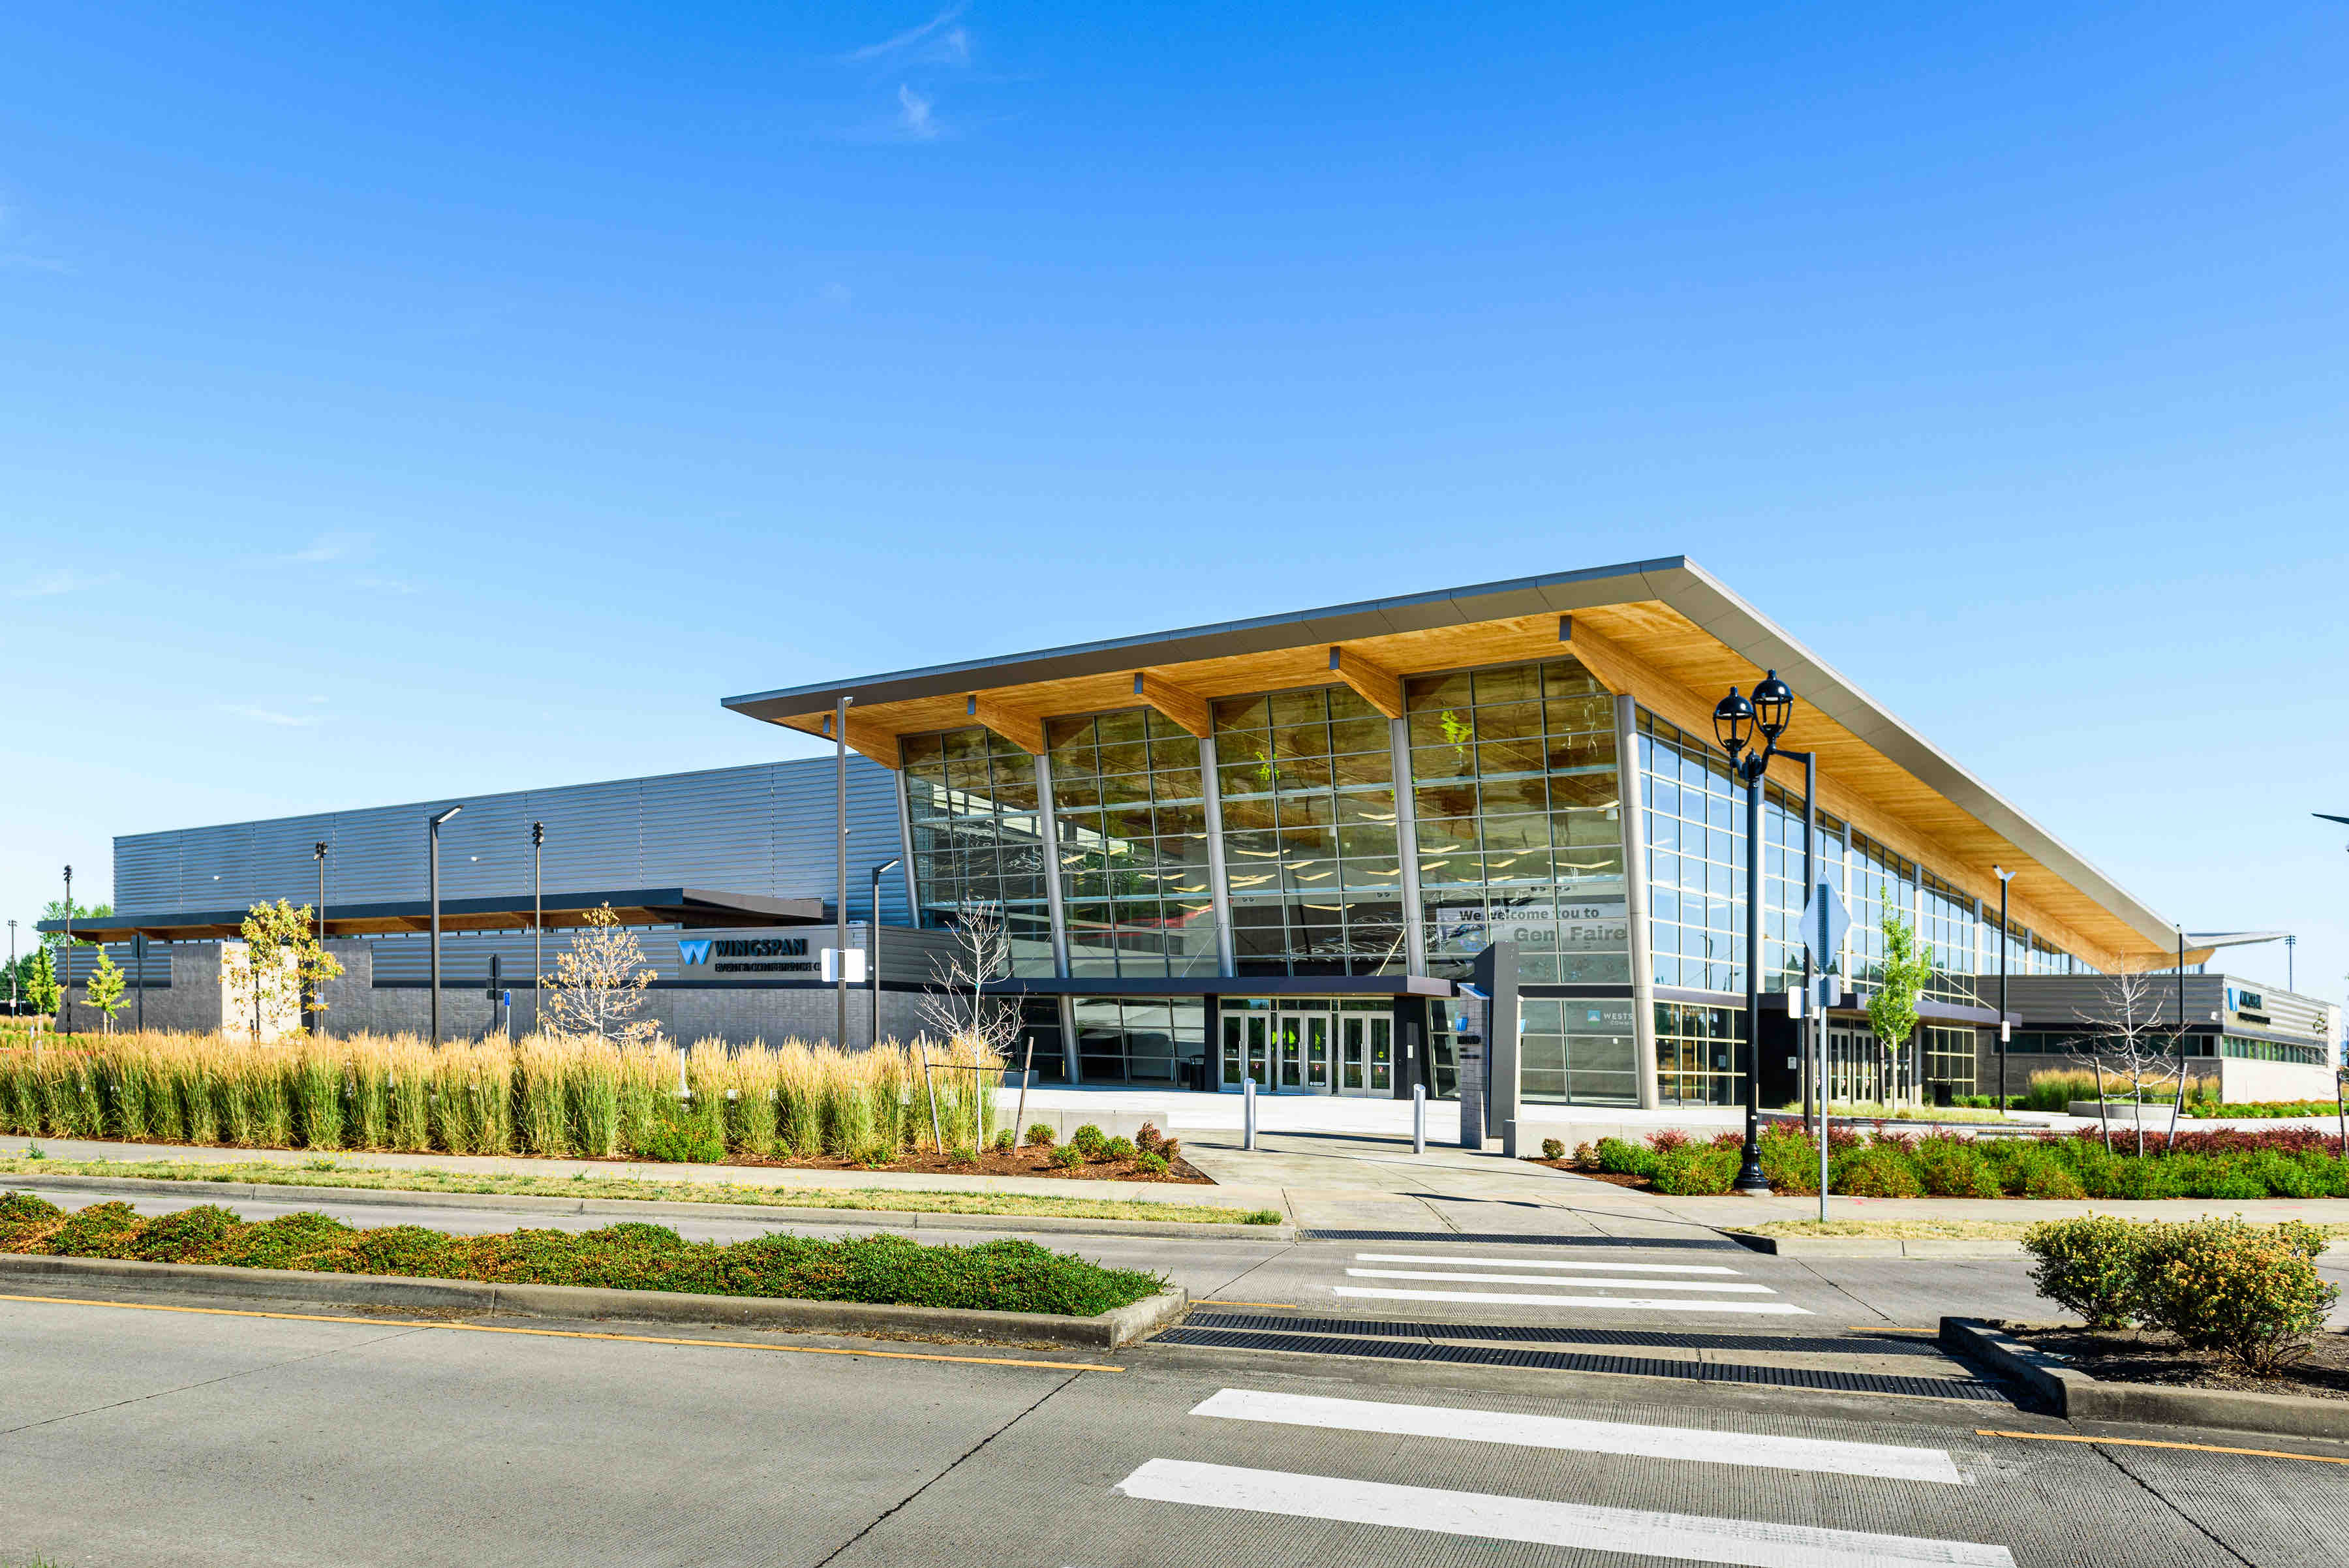 image of the Wingspan Events Center, home to the forthcoming Festival, courtesy Westside Commons